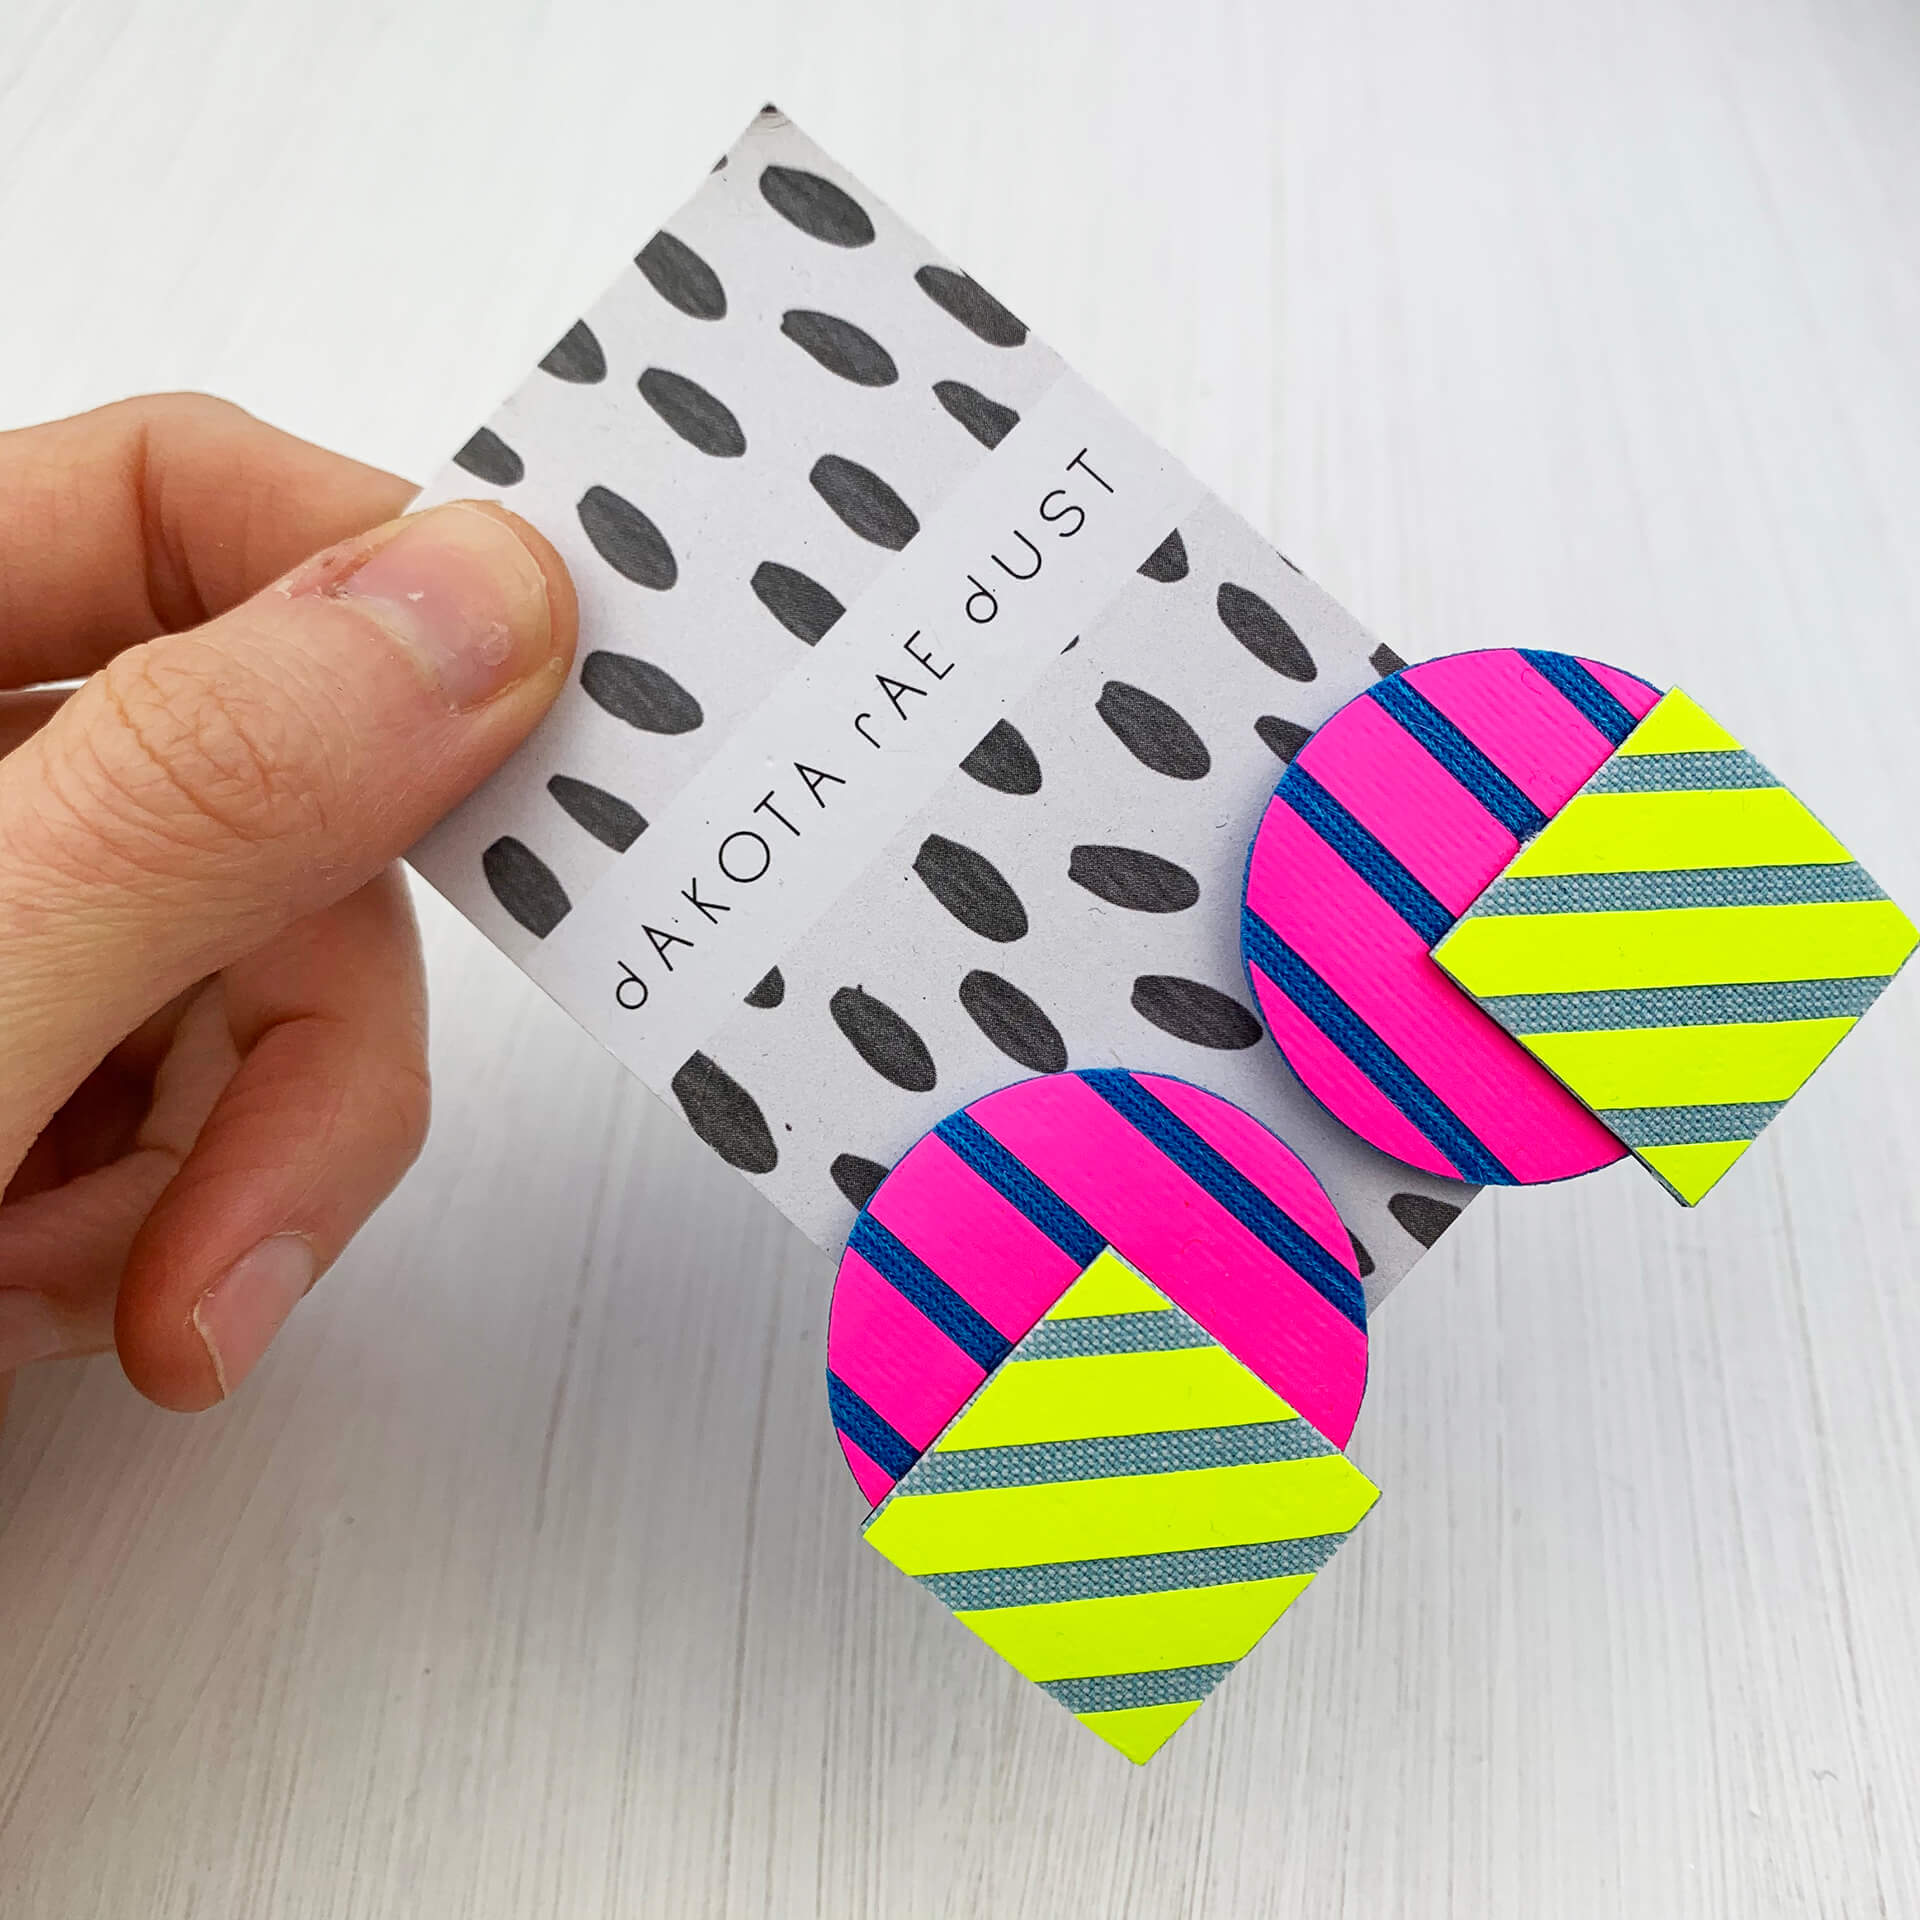 A pair of large colourful stud earrings made of a circle and square printed with fluorescent graphic stripes. The earrings are mounted on a black and white patterned, dakota rae dust branded card which is held between a woman's thumb and forefinger against an off white background